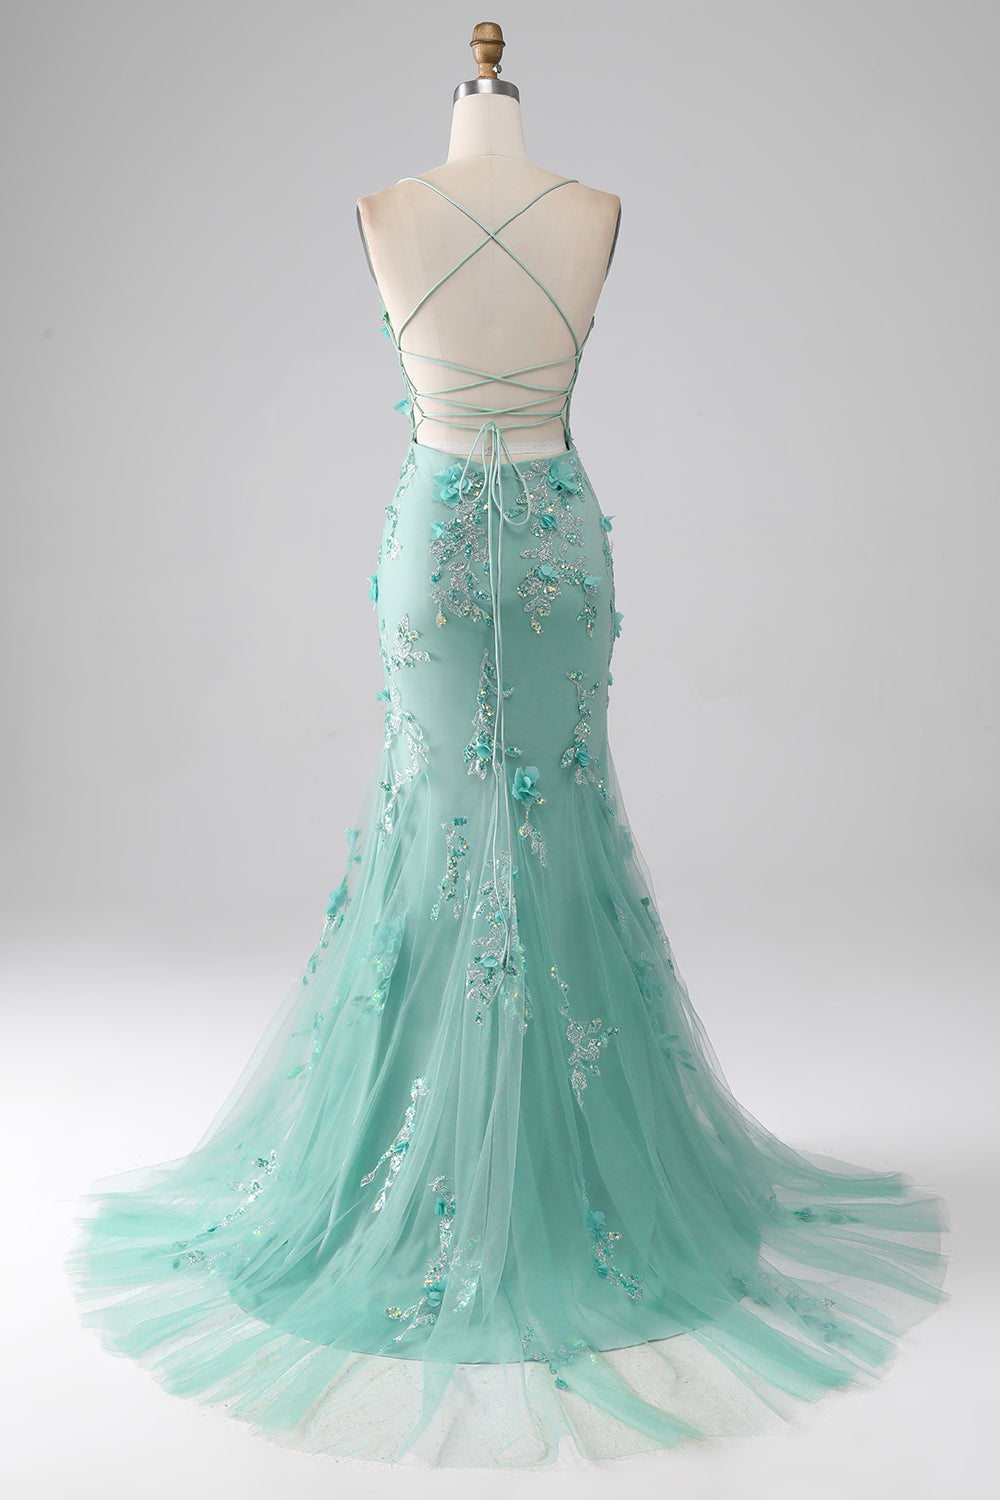 Green Mermaid Spaghetti Straps Long Prom Dress with Appliques